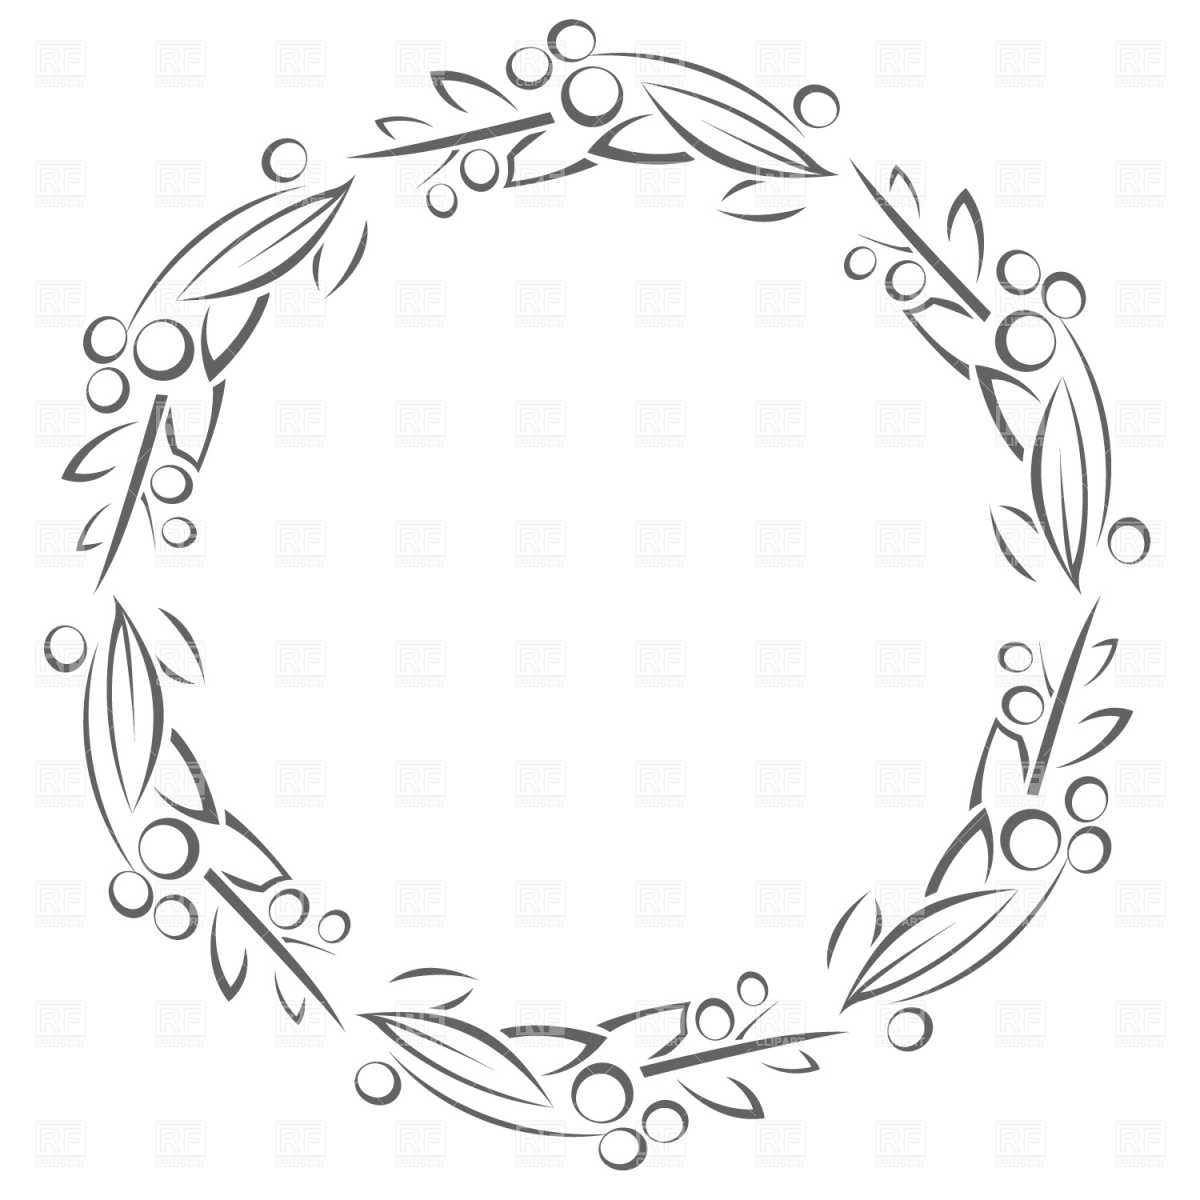 Circle Frame With Leaves 1150 Borders And Frames Download Royalty